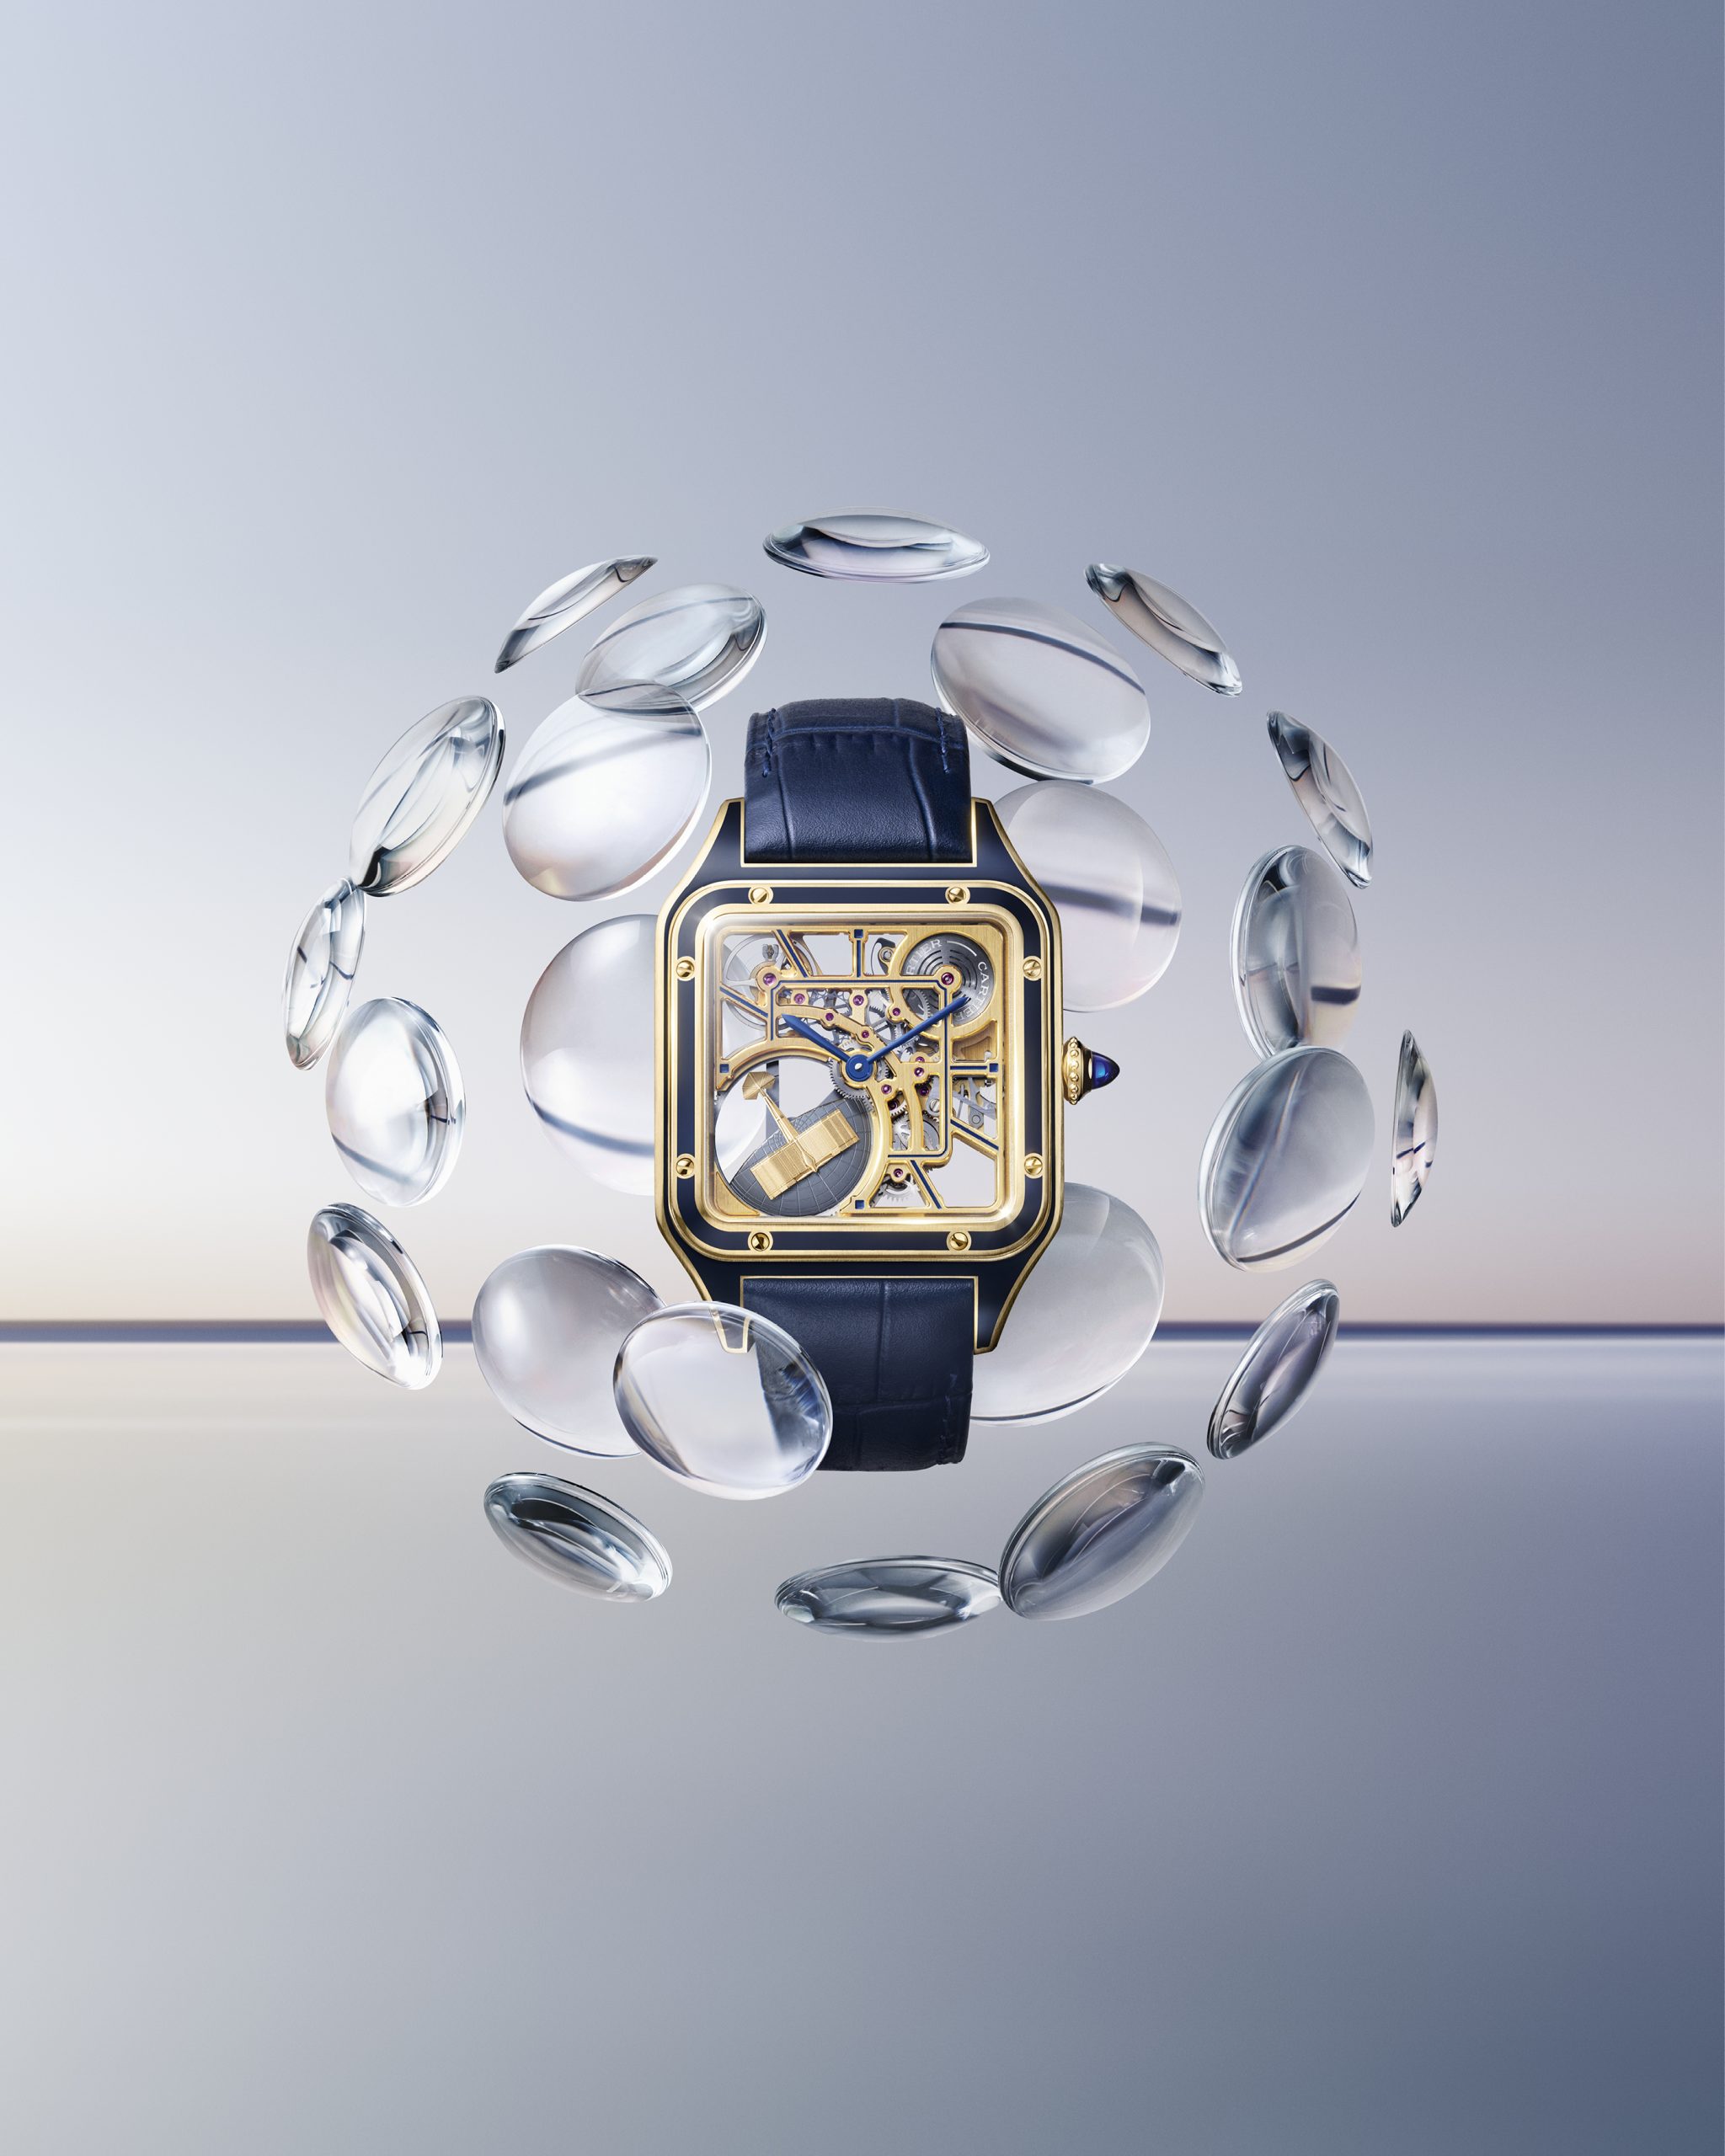 New Bulgari timepieces at Watches & Wonders 2023